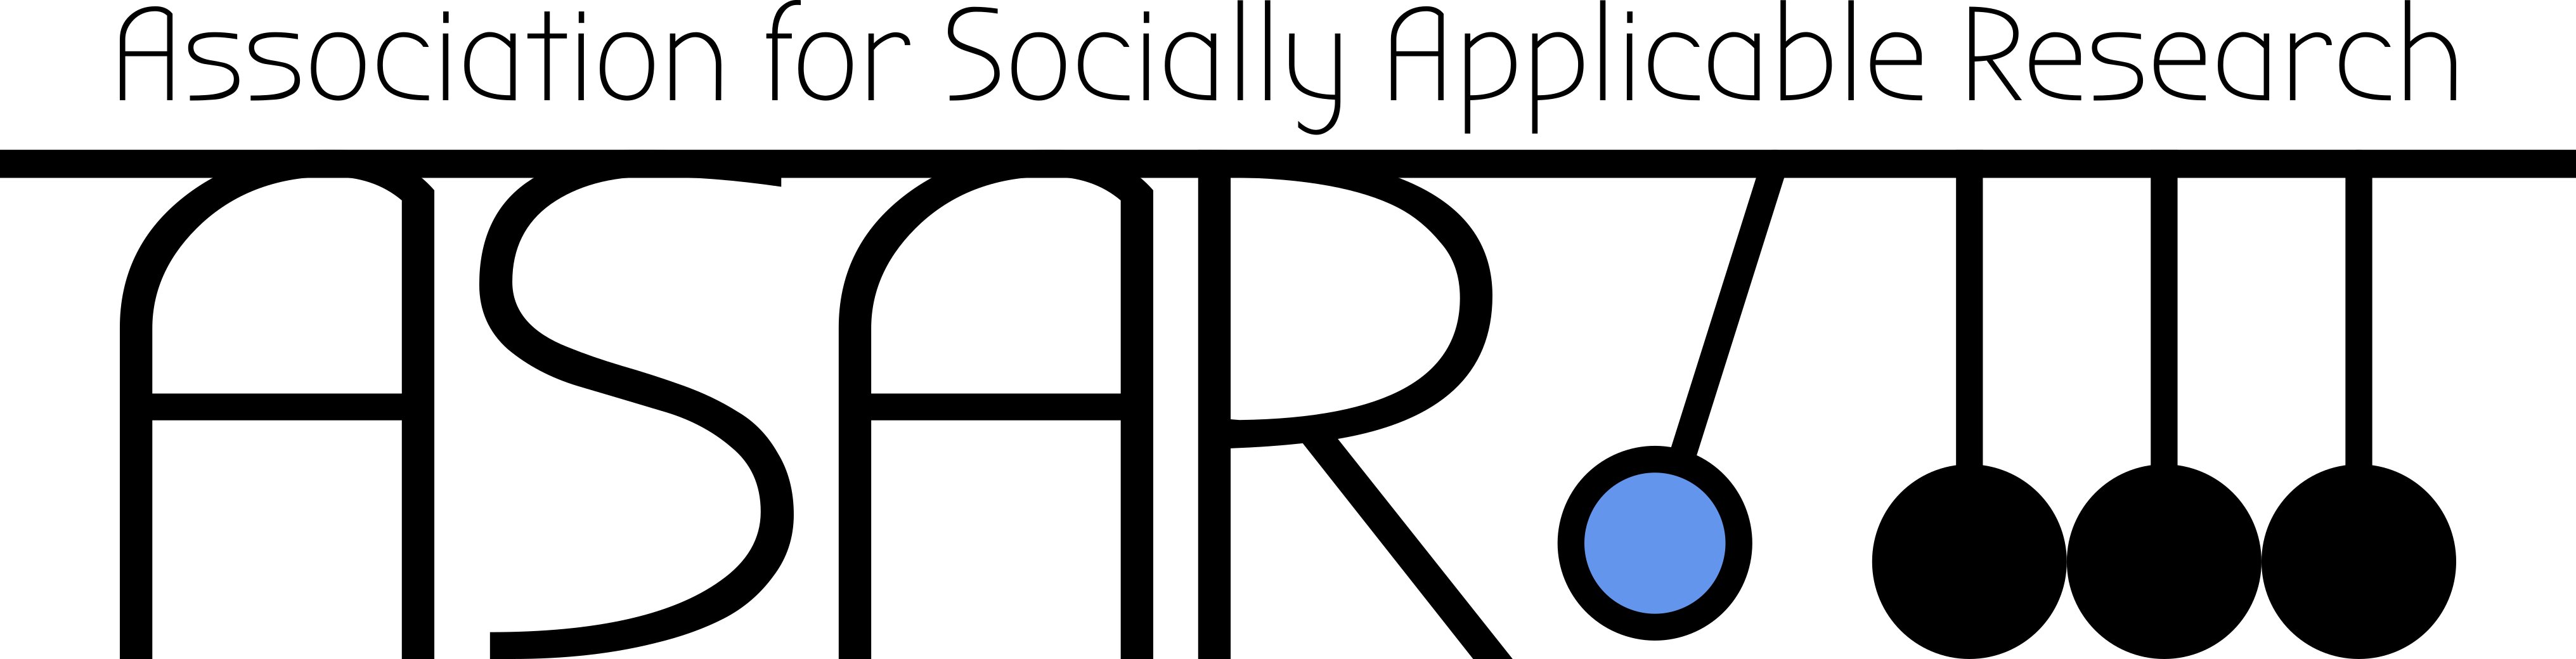 Association for Socially Applicable Research